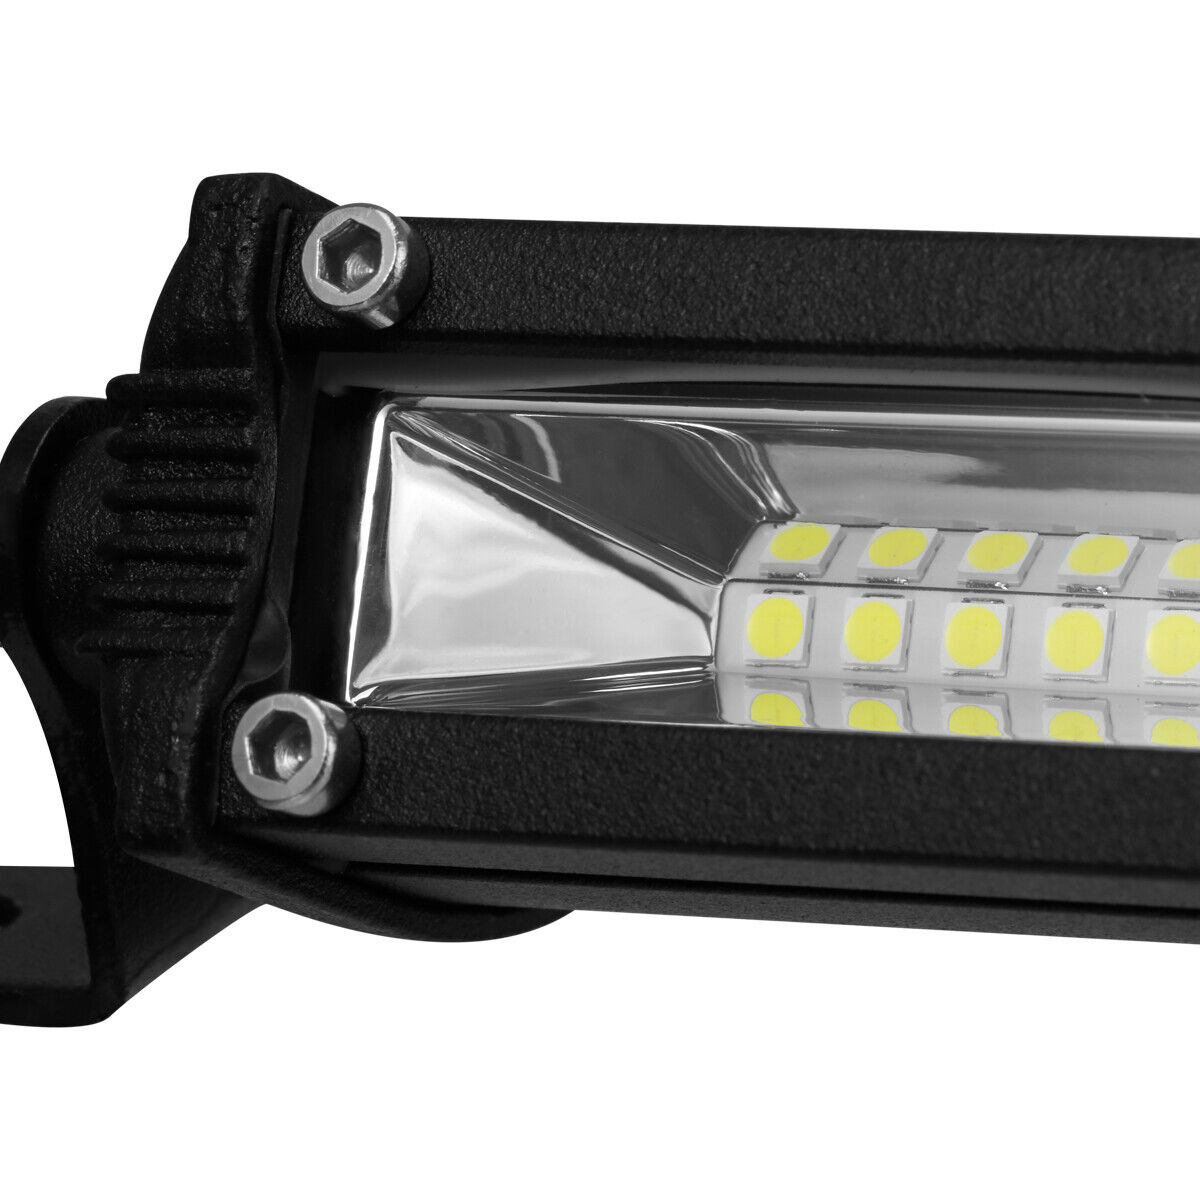 2x 12" inch 450W LED Work Light Bar Combo Spot Flood Driving Off Road SUV Boat Unbranded Does Not Apply - фотография #12